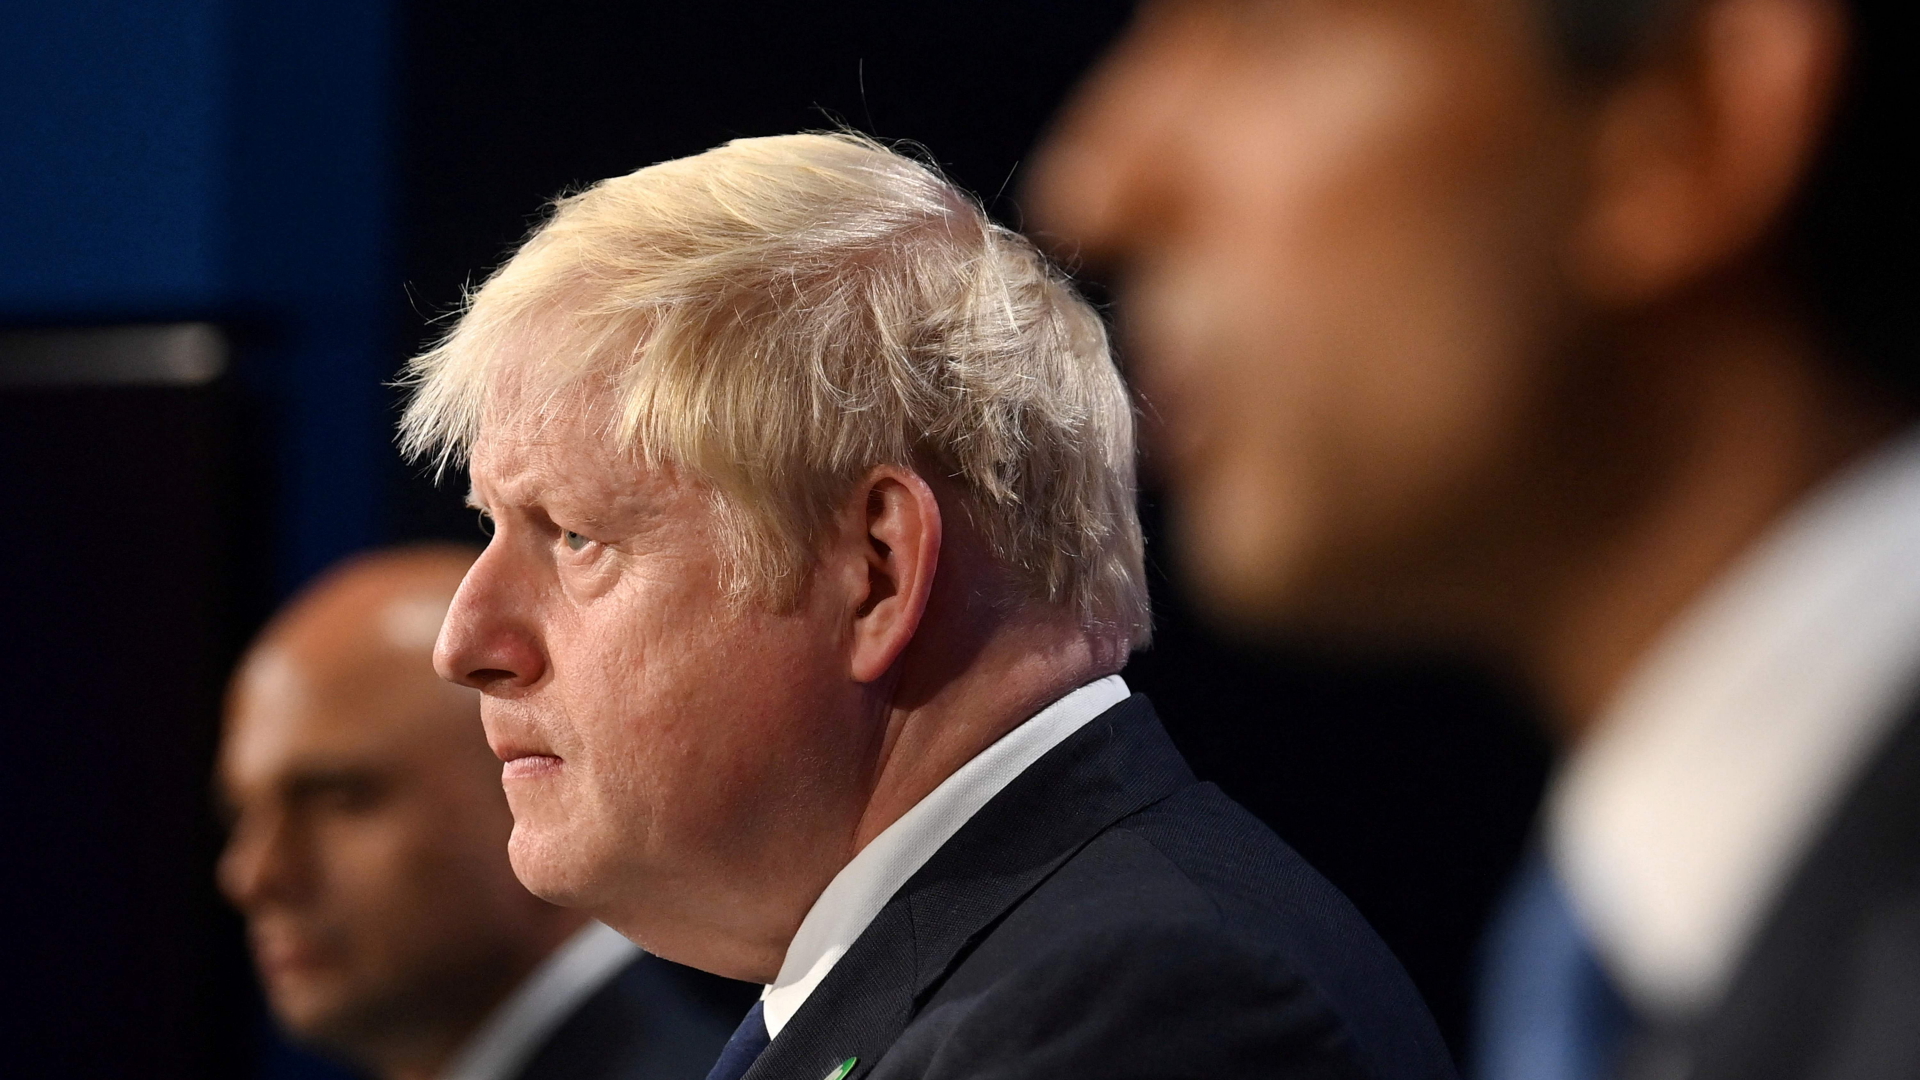 The Treasury and Health ministers resigned in protest against Johnson